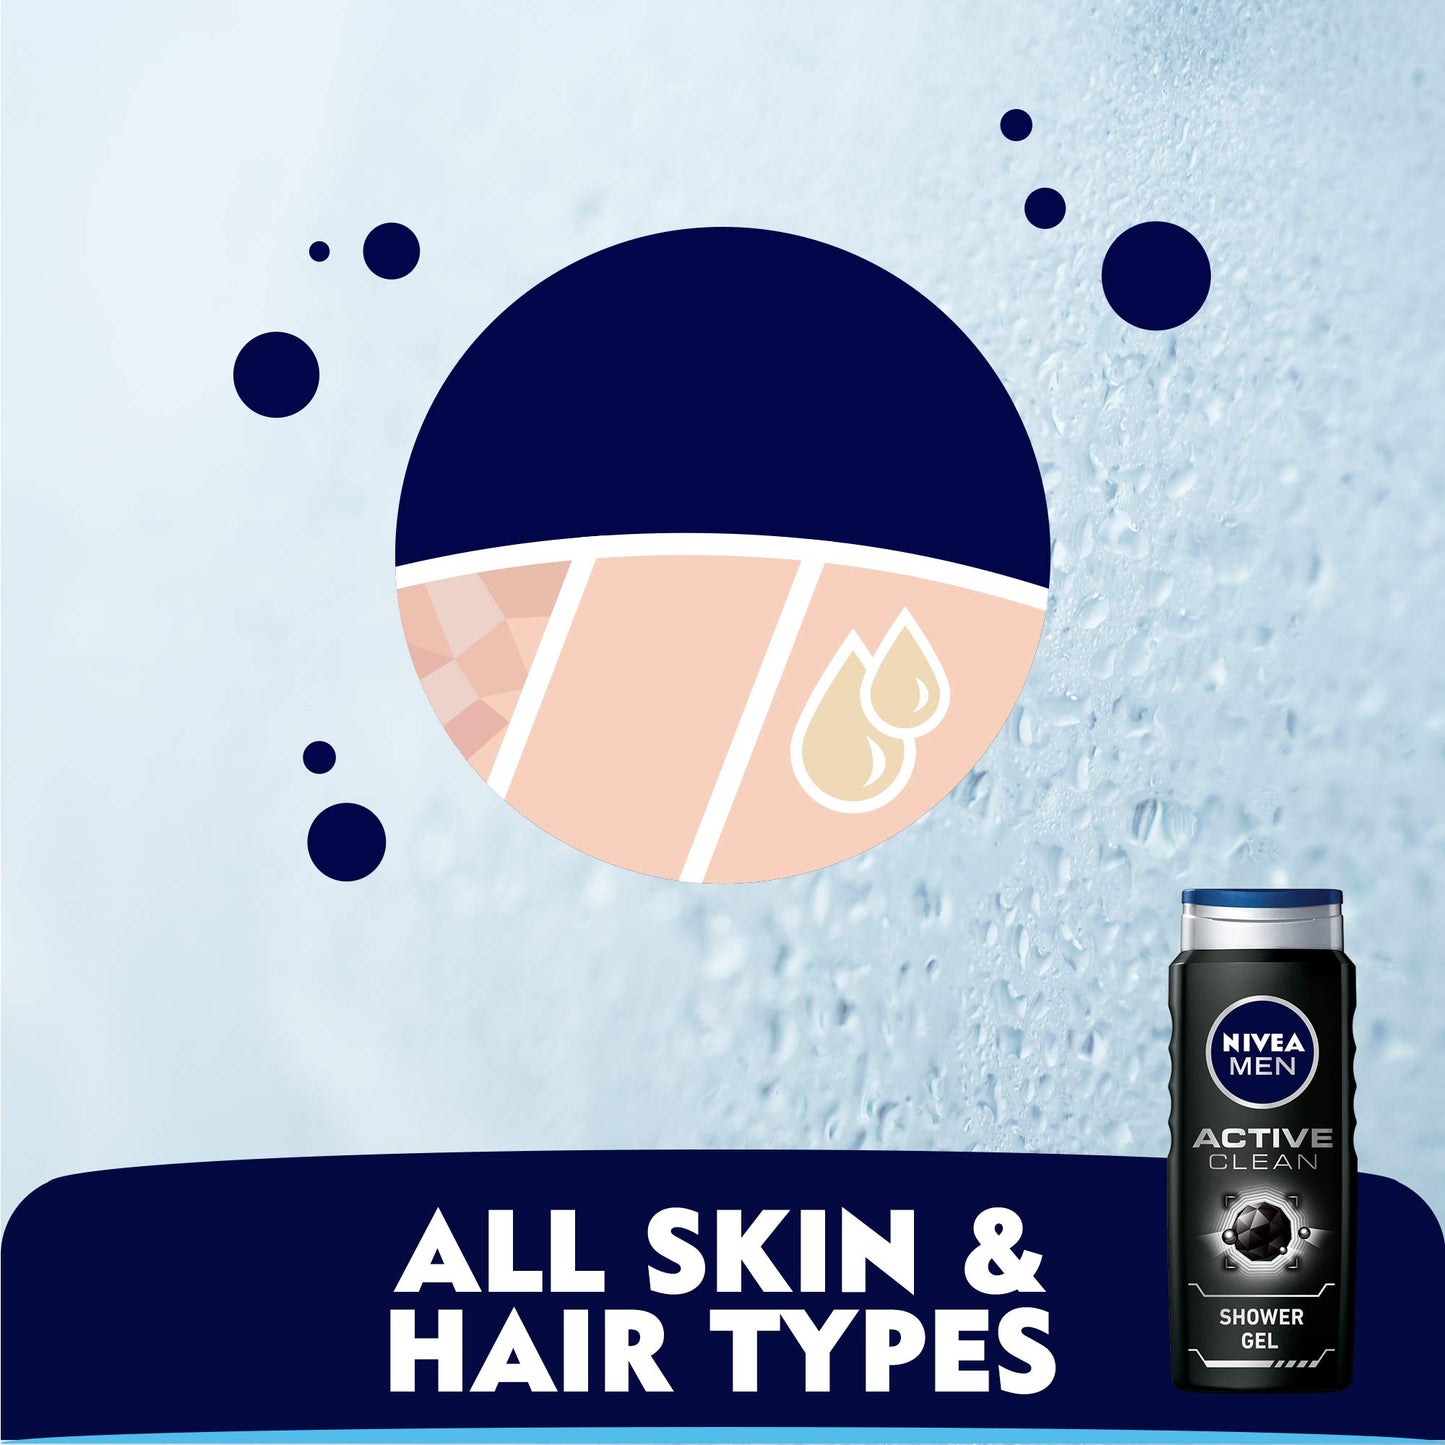 NIVEA MEN 3in1 Shower Gel Body Wash, Cleansing Active Clean Charcoal Woody Scent, 2x500ml